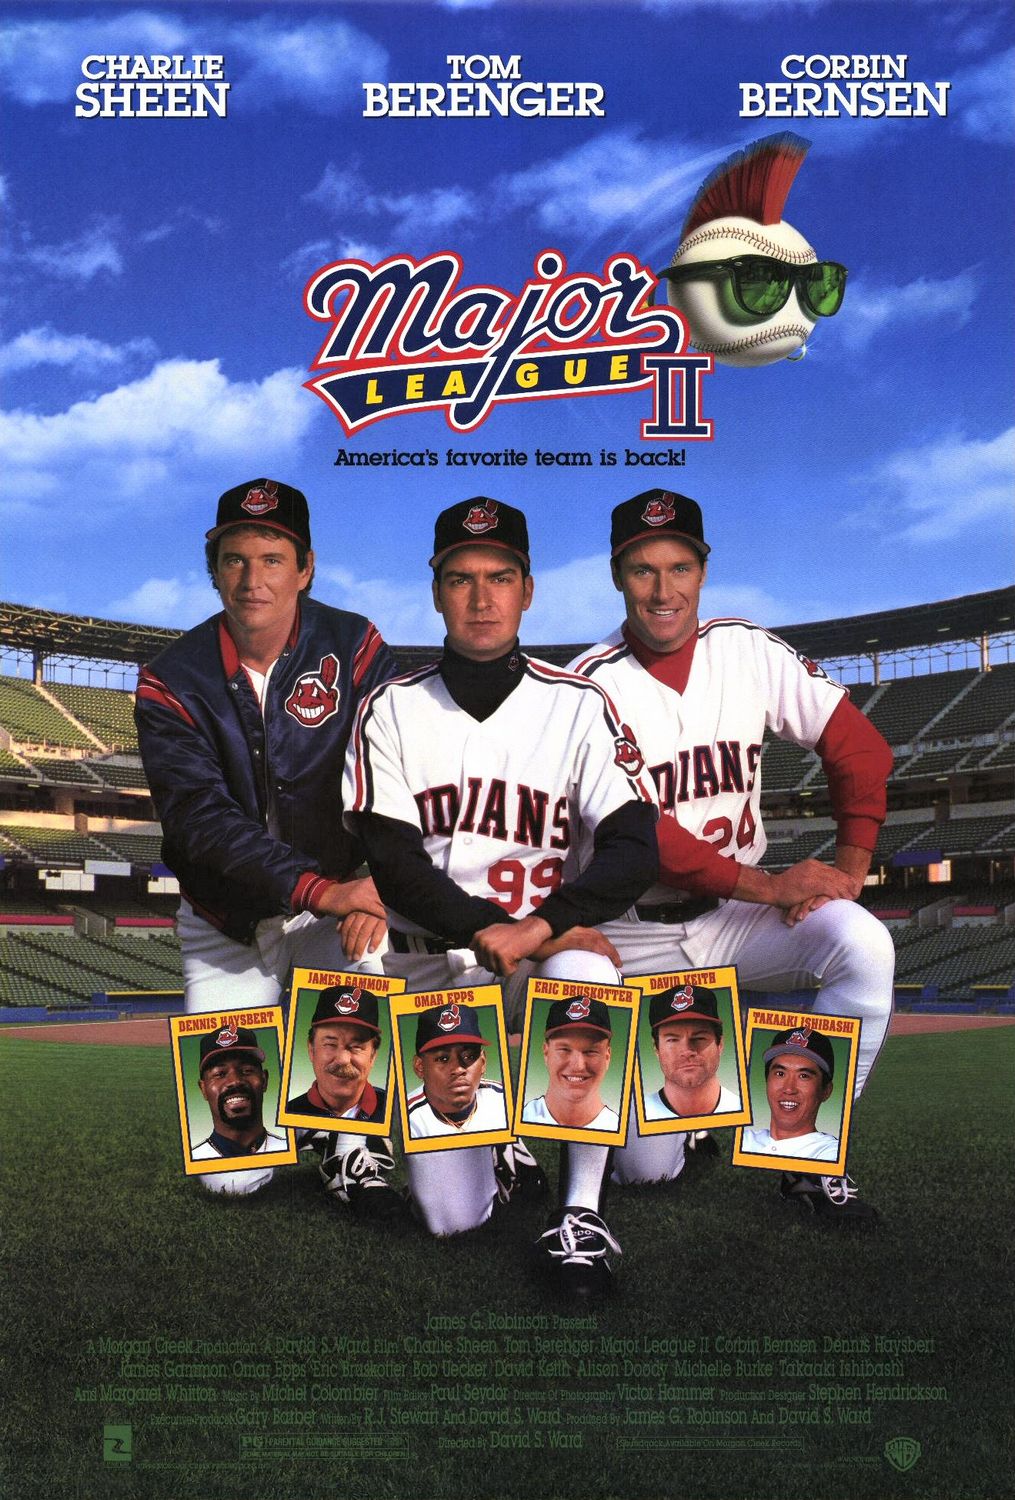 Who would you rather have: Rick Vaughn or Willie Mays Hayes? - The